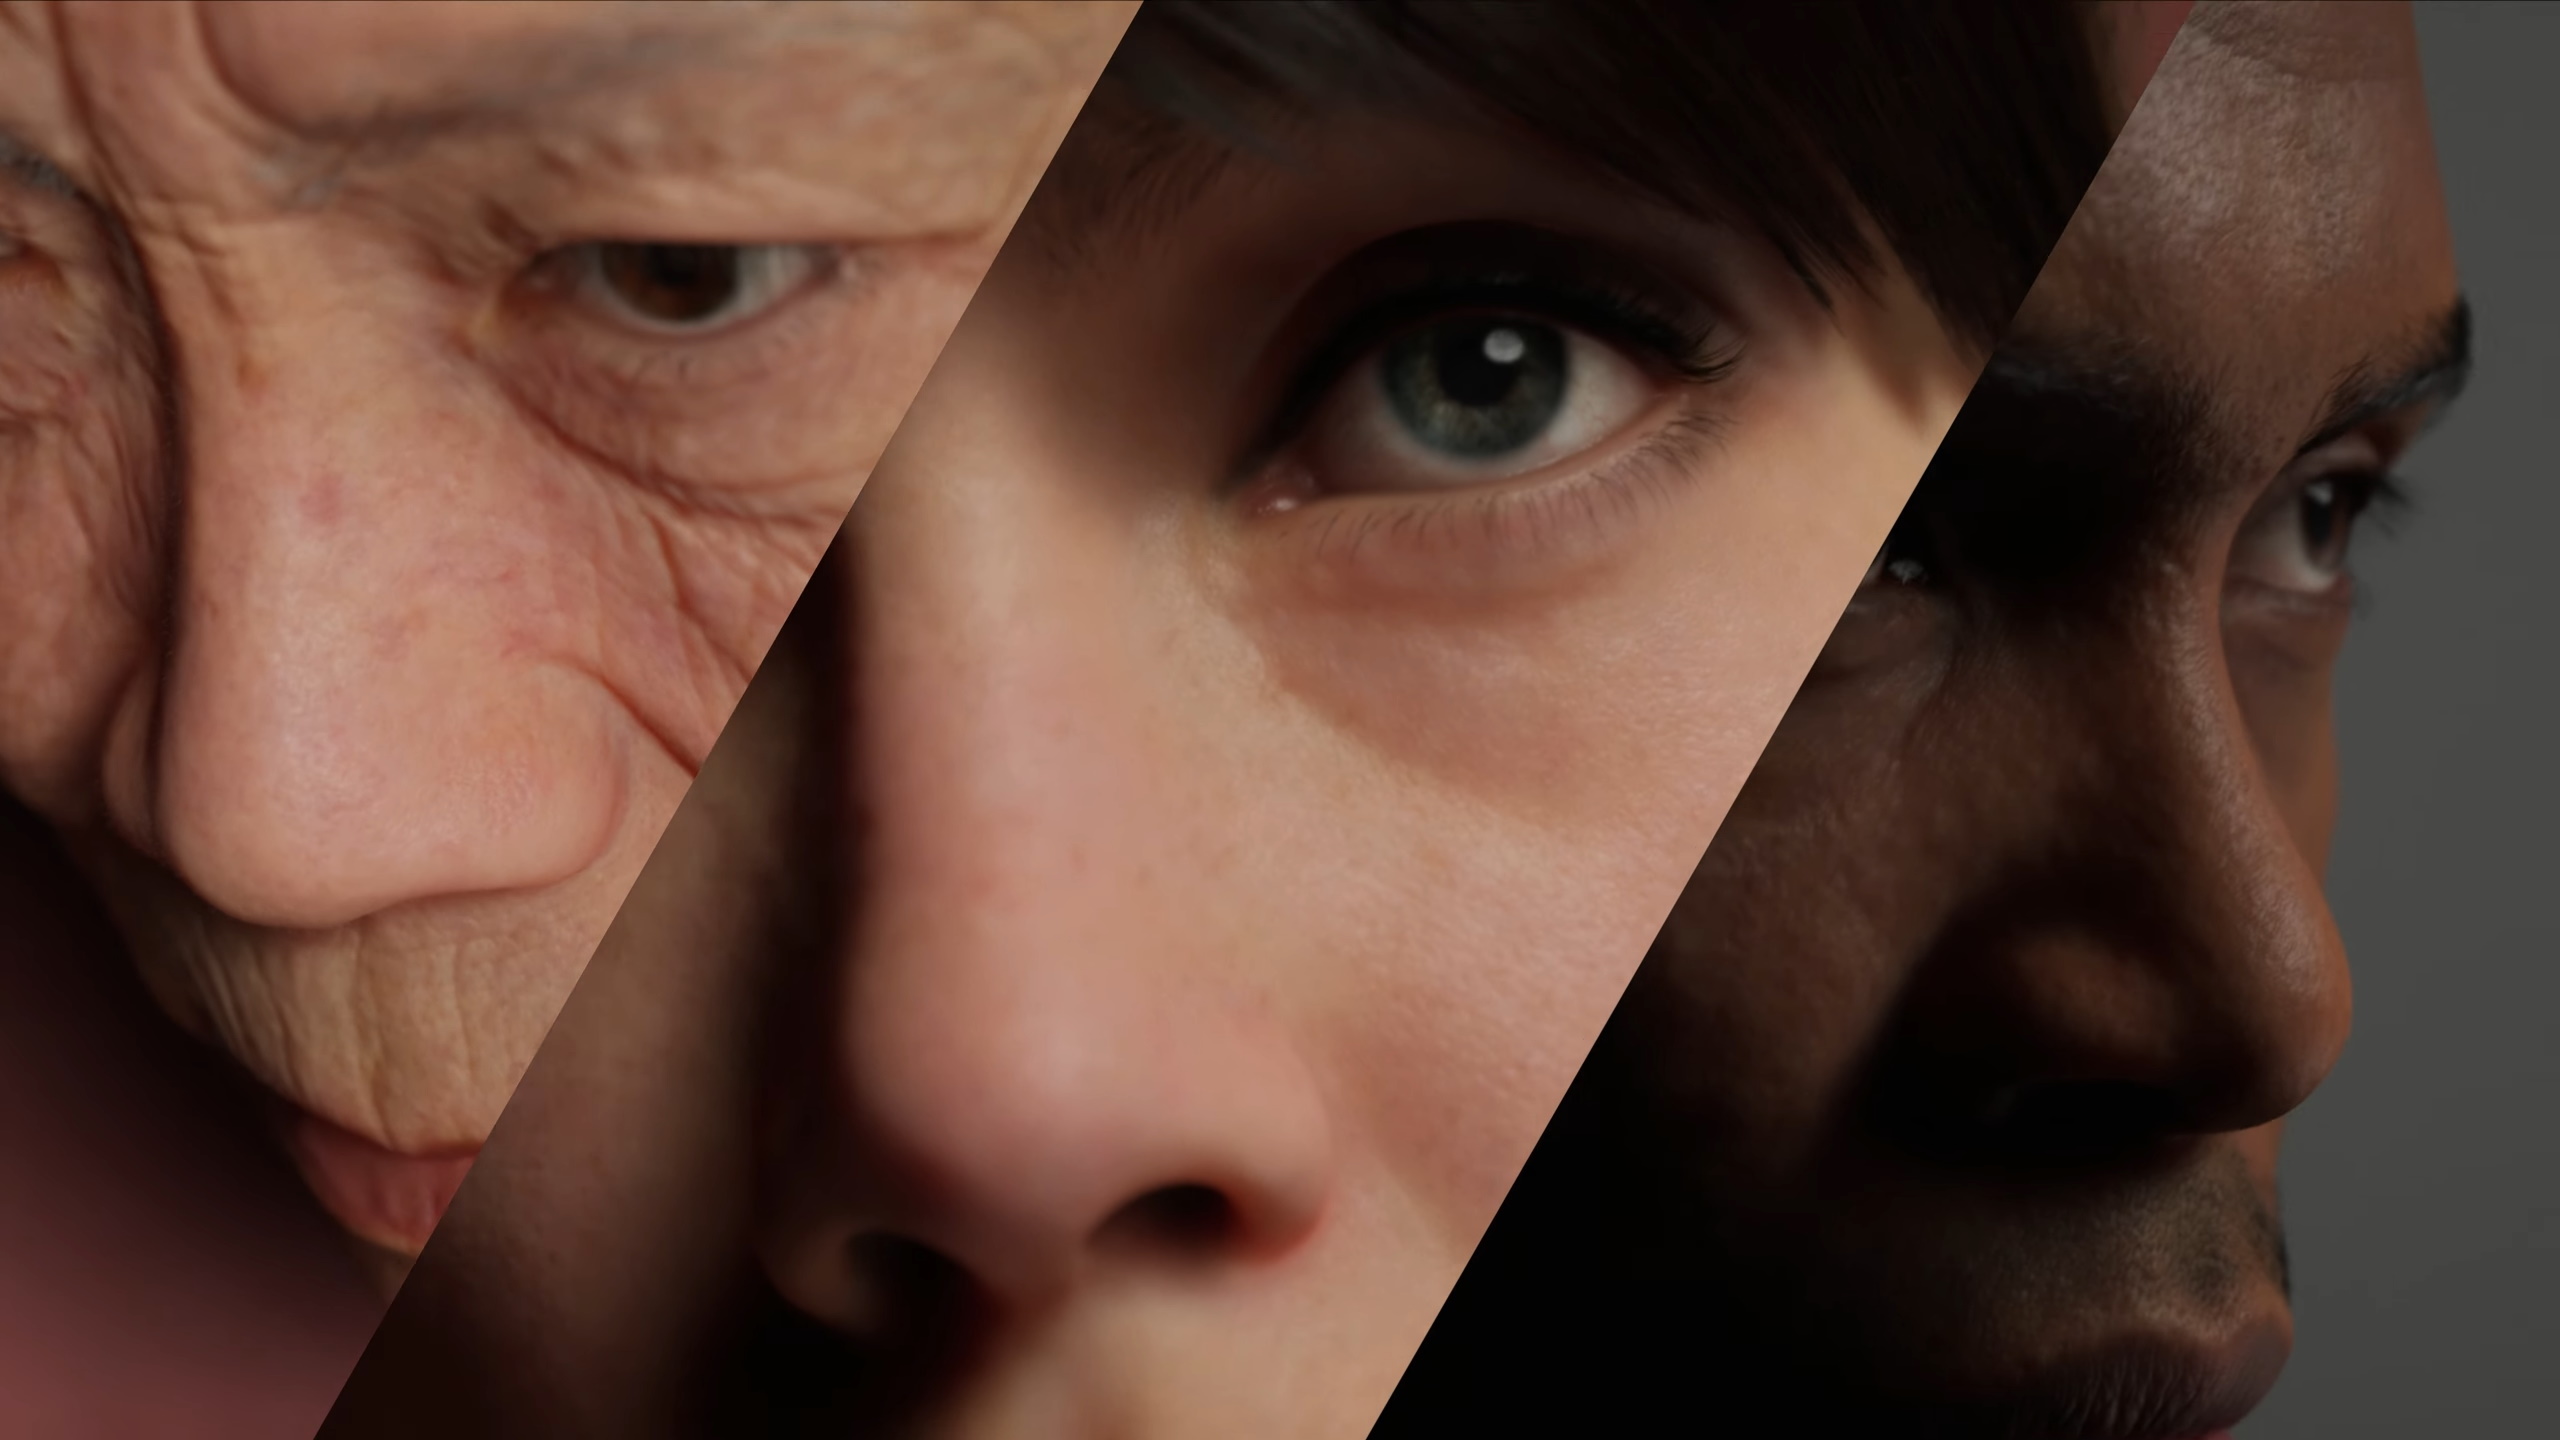 Close-up of CG faces showing details of skin reflectivity and wrinkles.